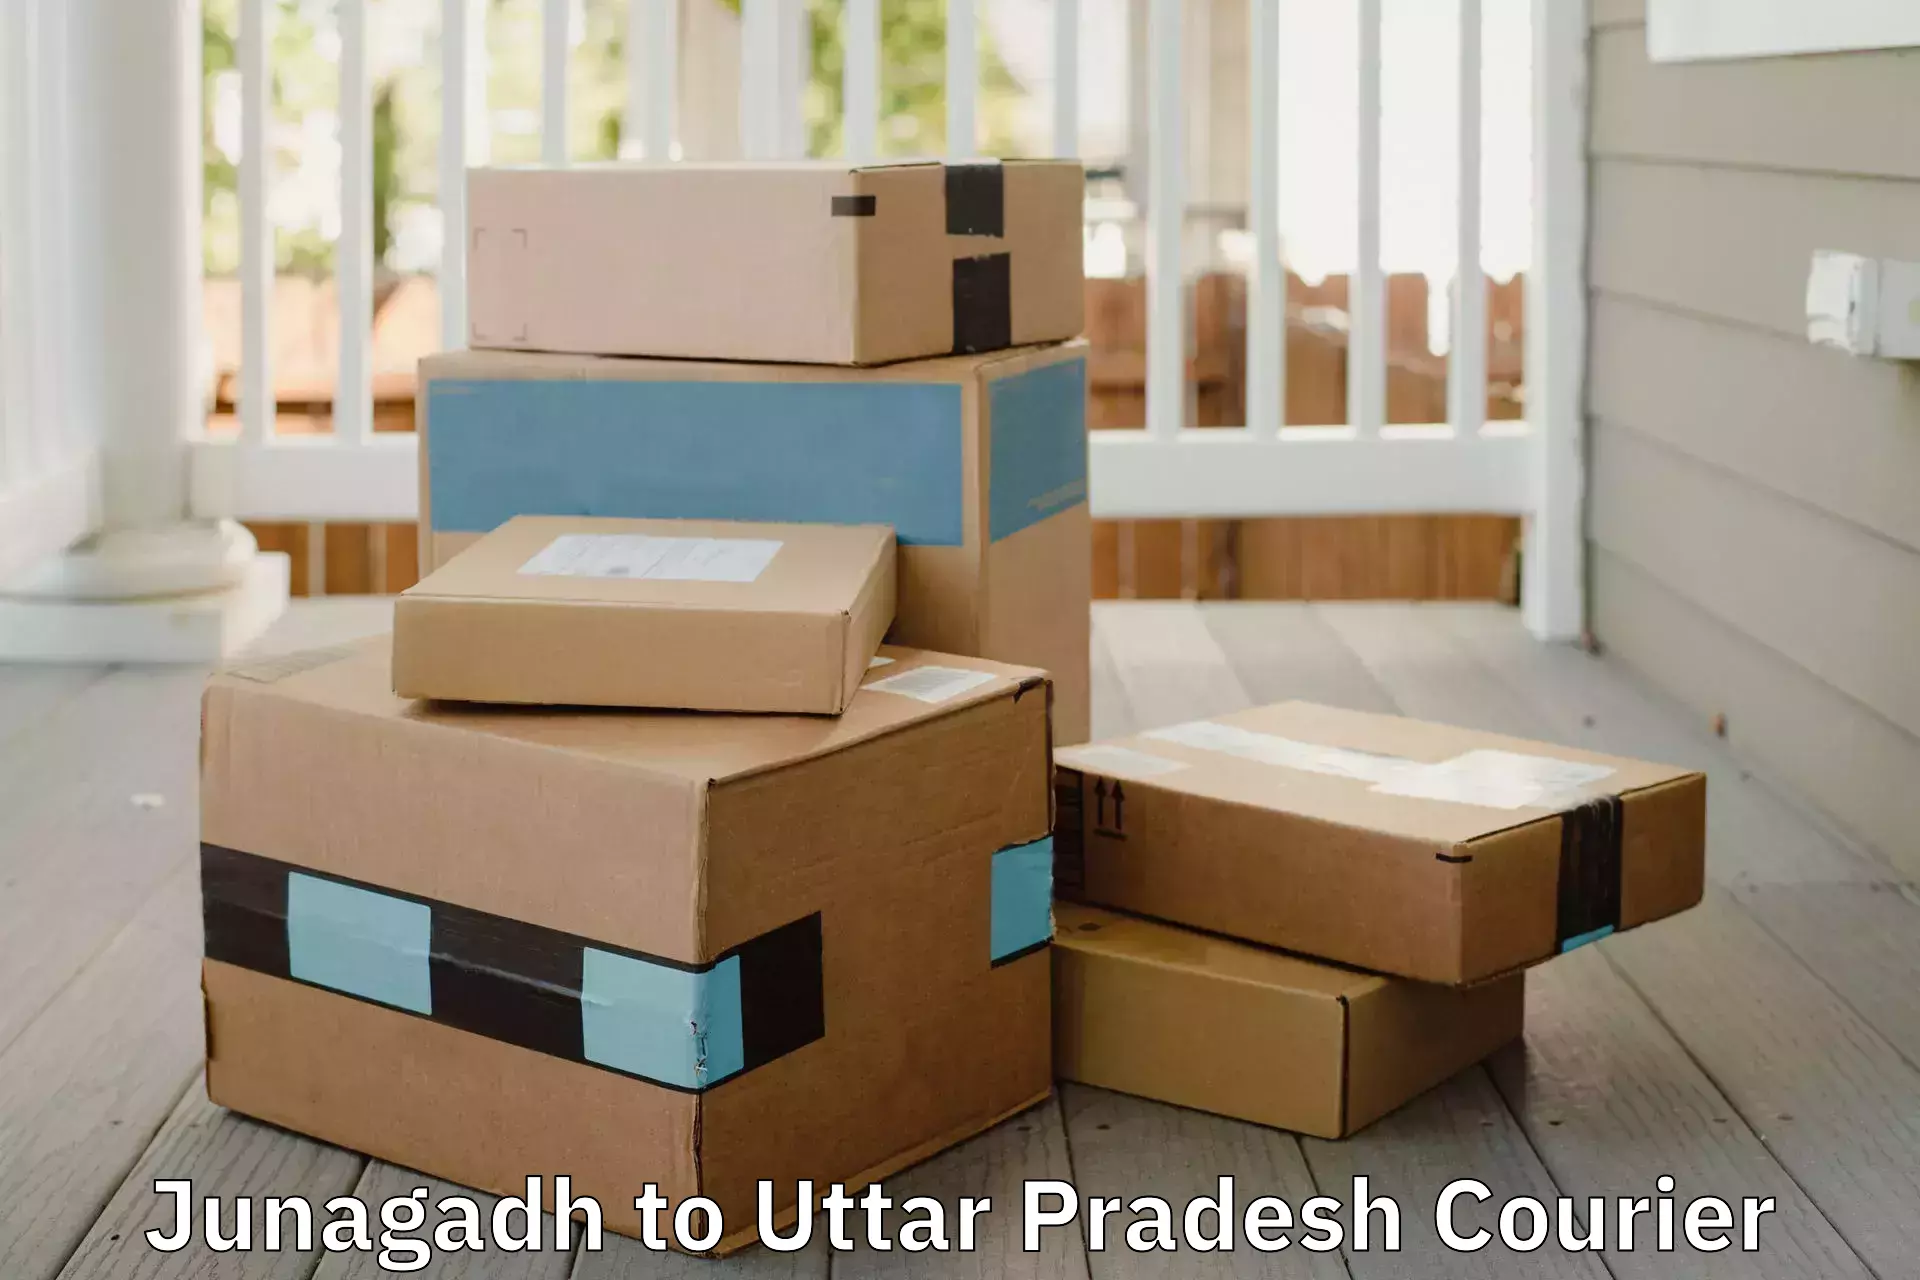 Reliable movers in Junagadh to Kulpahar